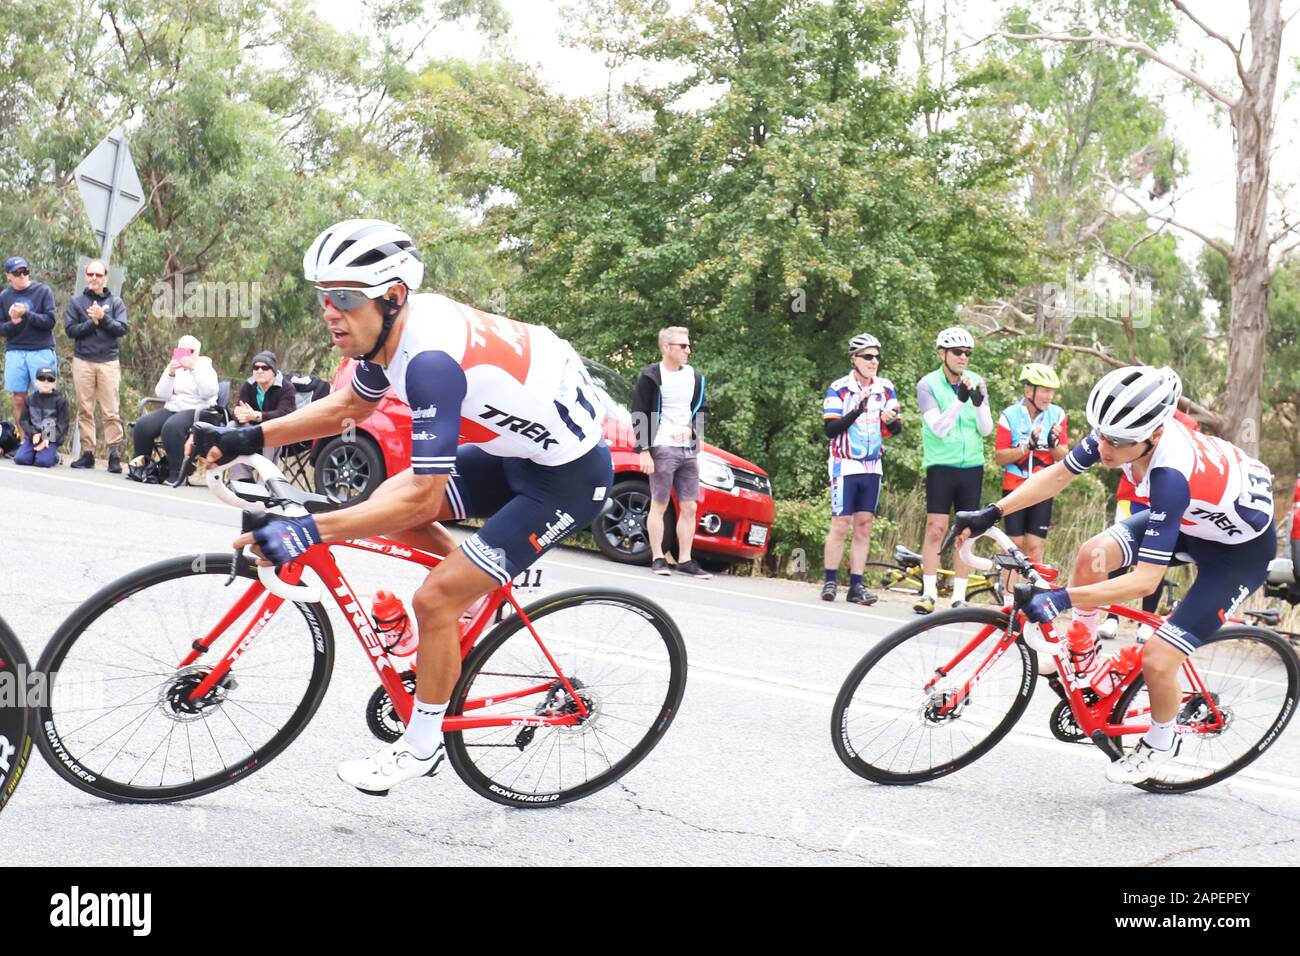 Adelaide Hills, Australia. 23 January 2020. Eventual winner Richie Porte (AUS) from the Trek-Segafredo (USA) Team (left, number 11) on stage 3 of the Tour Down Under cycling race passing through the Houghton area of the Adelaide Hills in Australia. Credit: Russell Mountford/Alamy Live News. Stock Photo